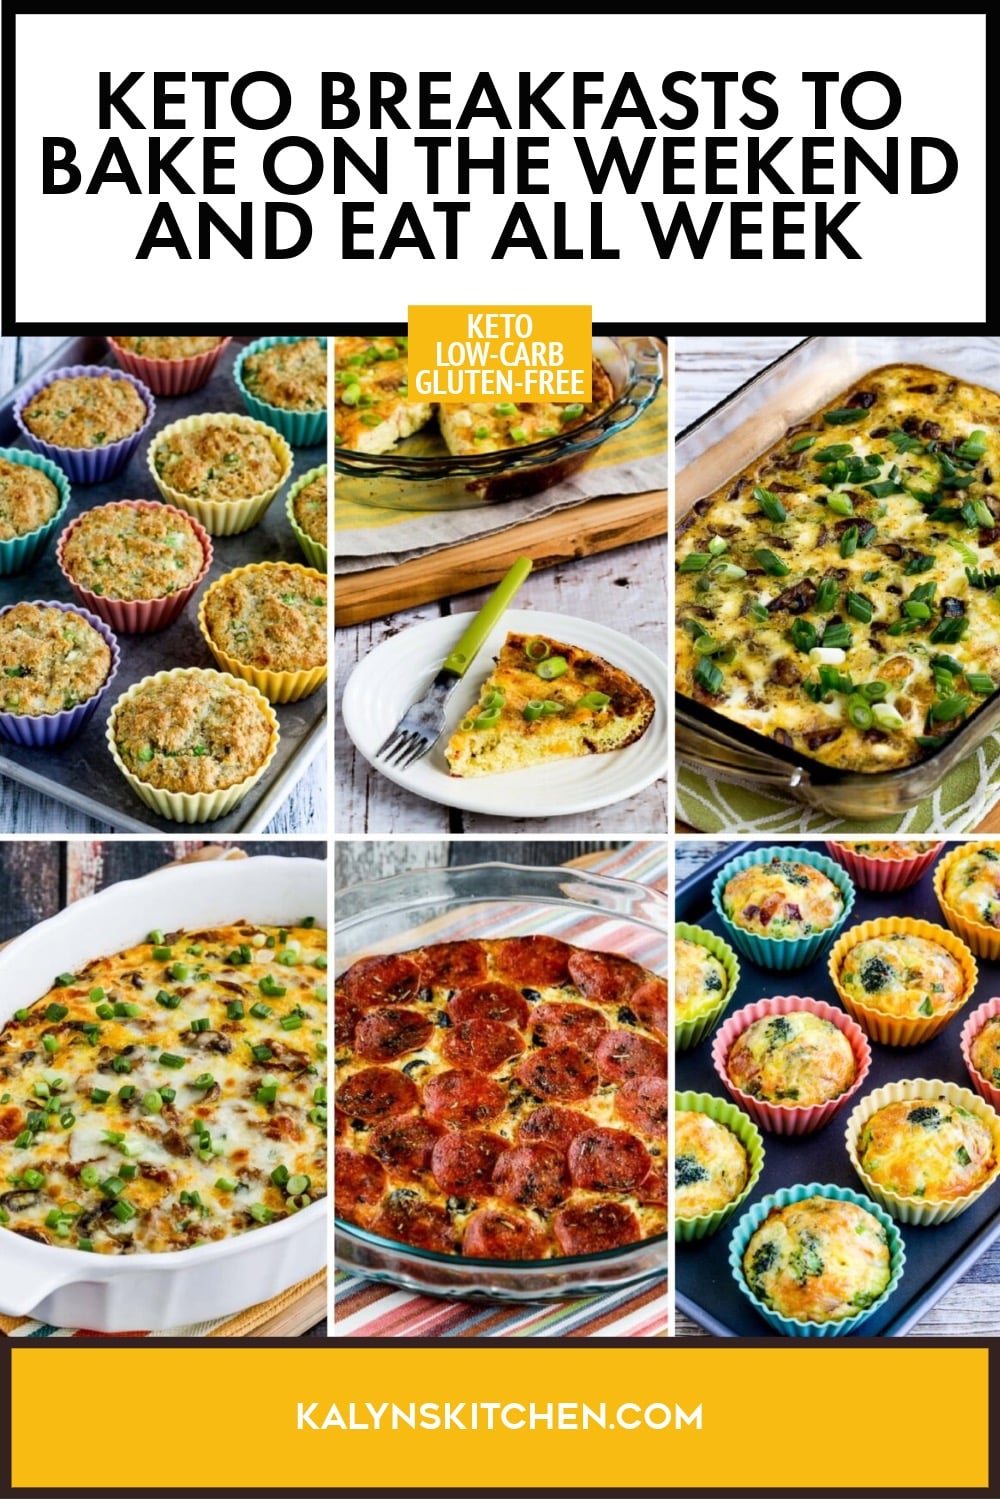 Pinterest image of Keto Breakfasts to Bake on the Weekend and Eat All Week